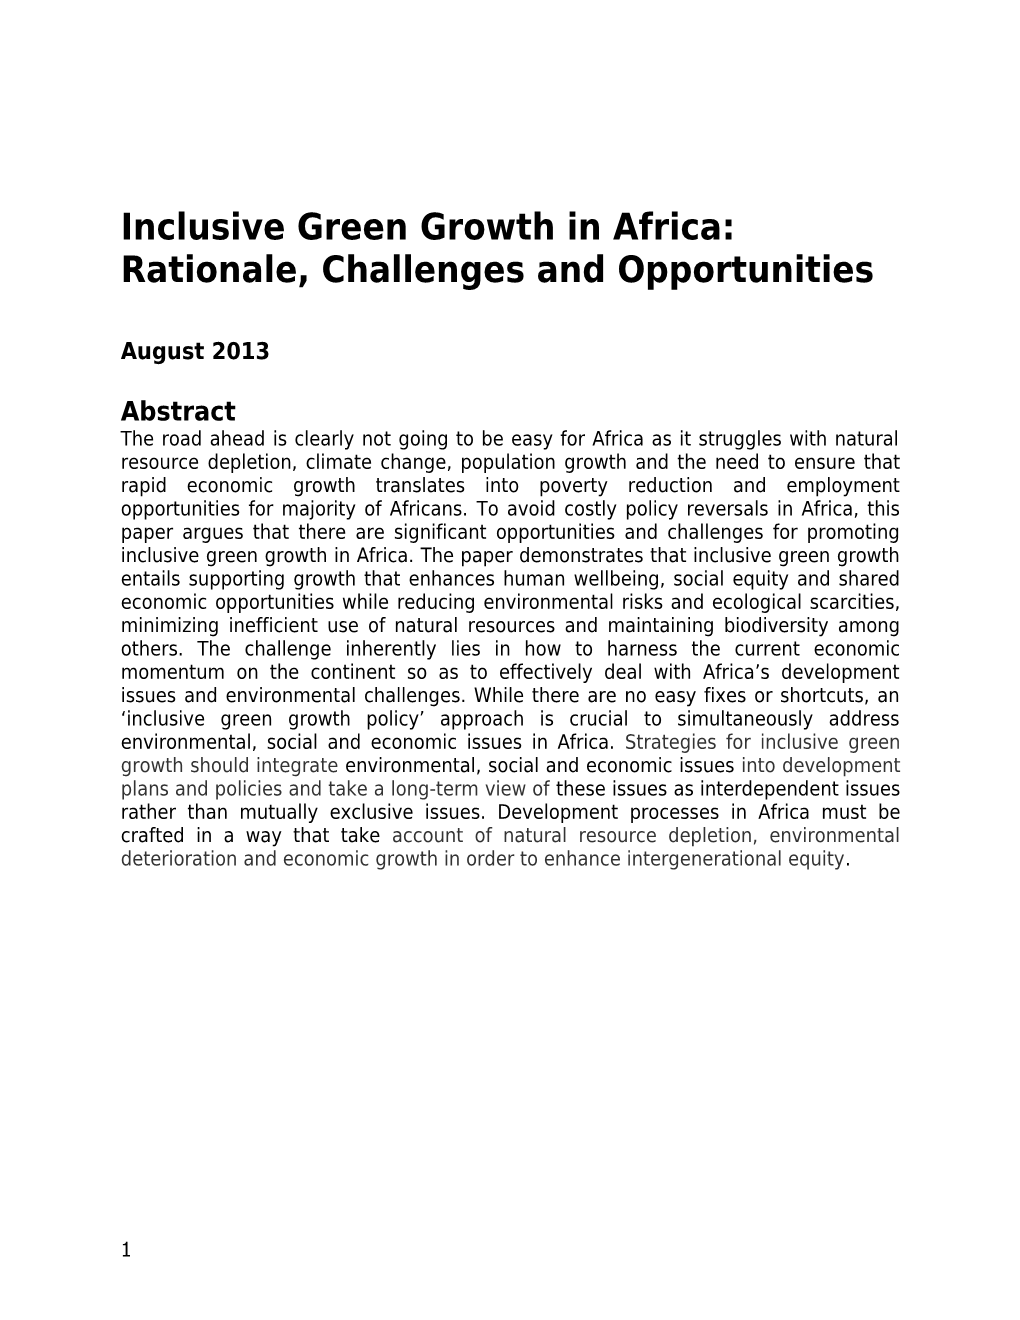 Inclusive Green Growth in Africa: Rationale, Challenges and Opportunities